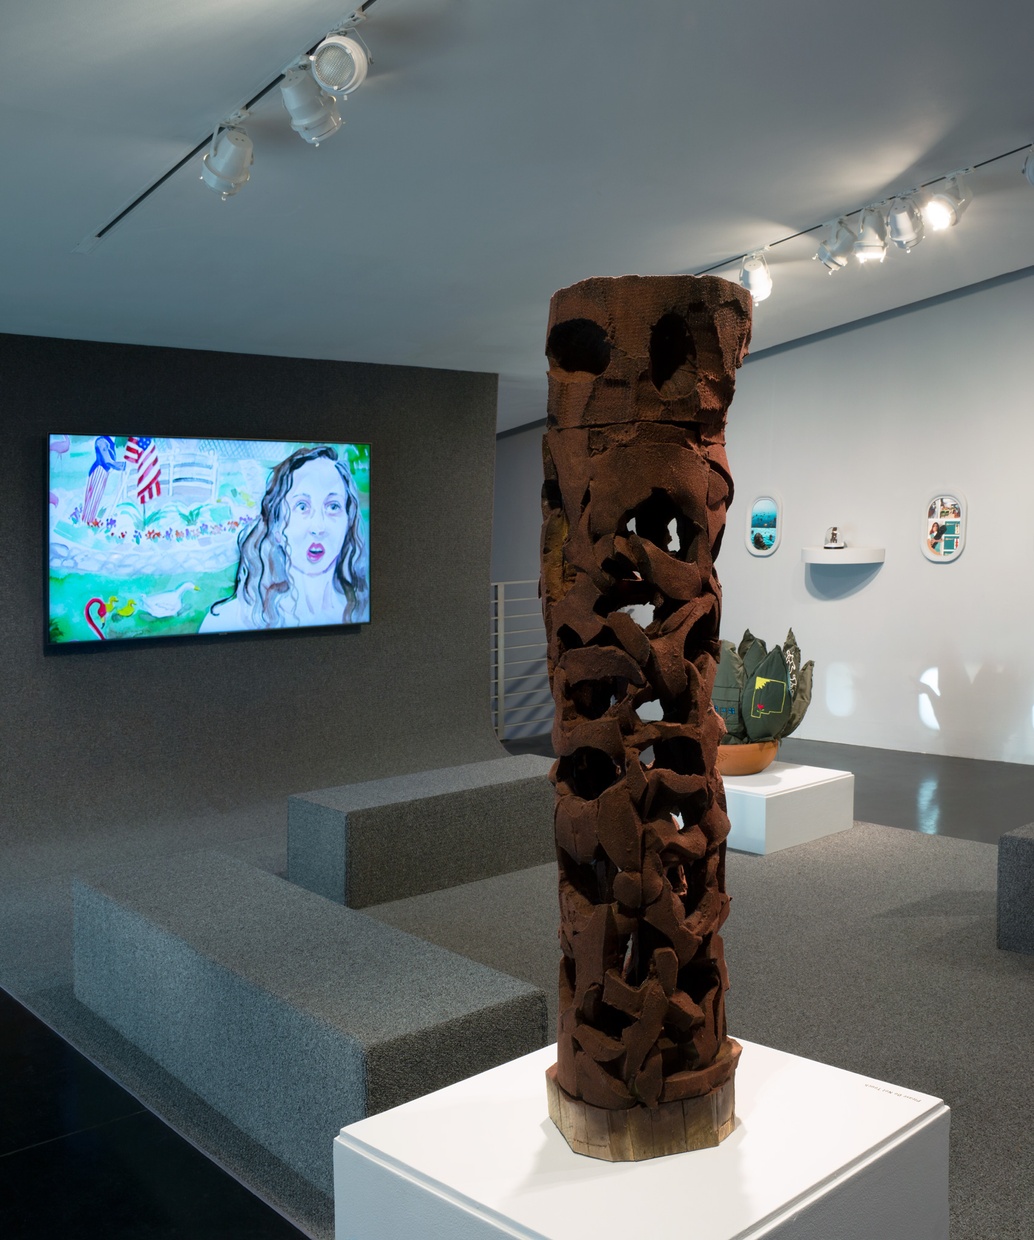 A vertically oriented sculpture sits on a plinth, and in the background is a television showing an image from a watercolor animation, a sculpture of a cactus, and framed collages.